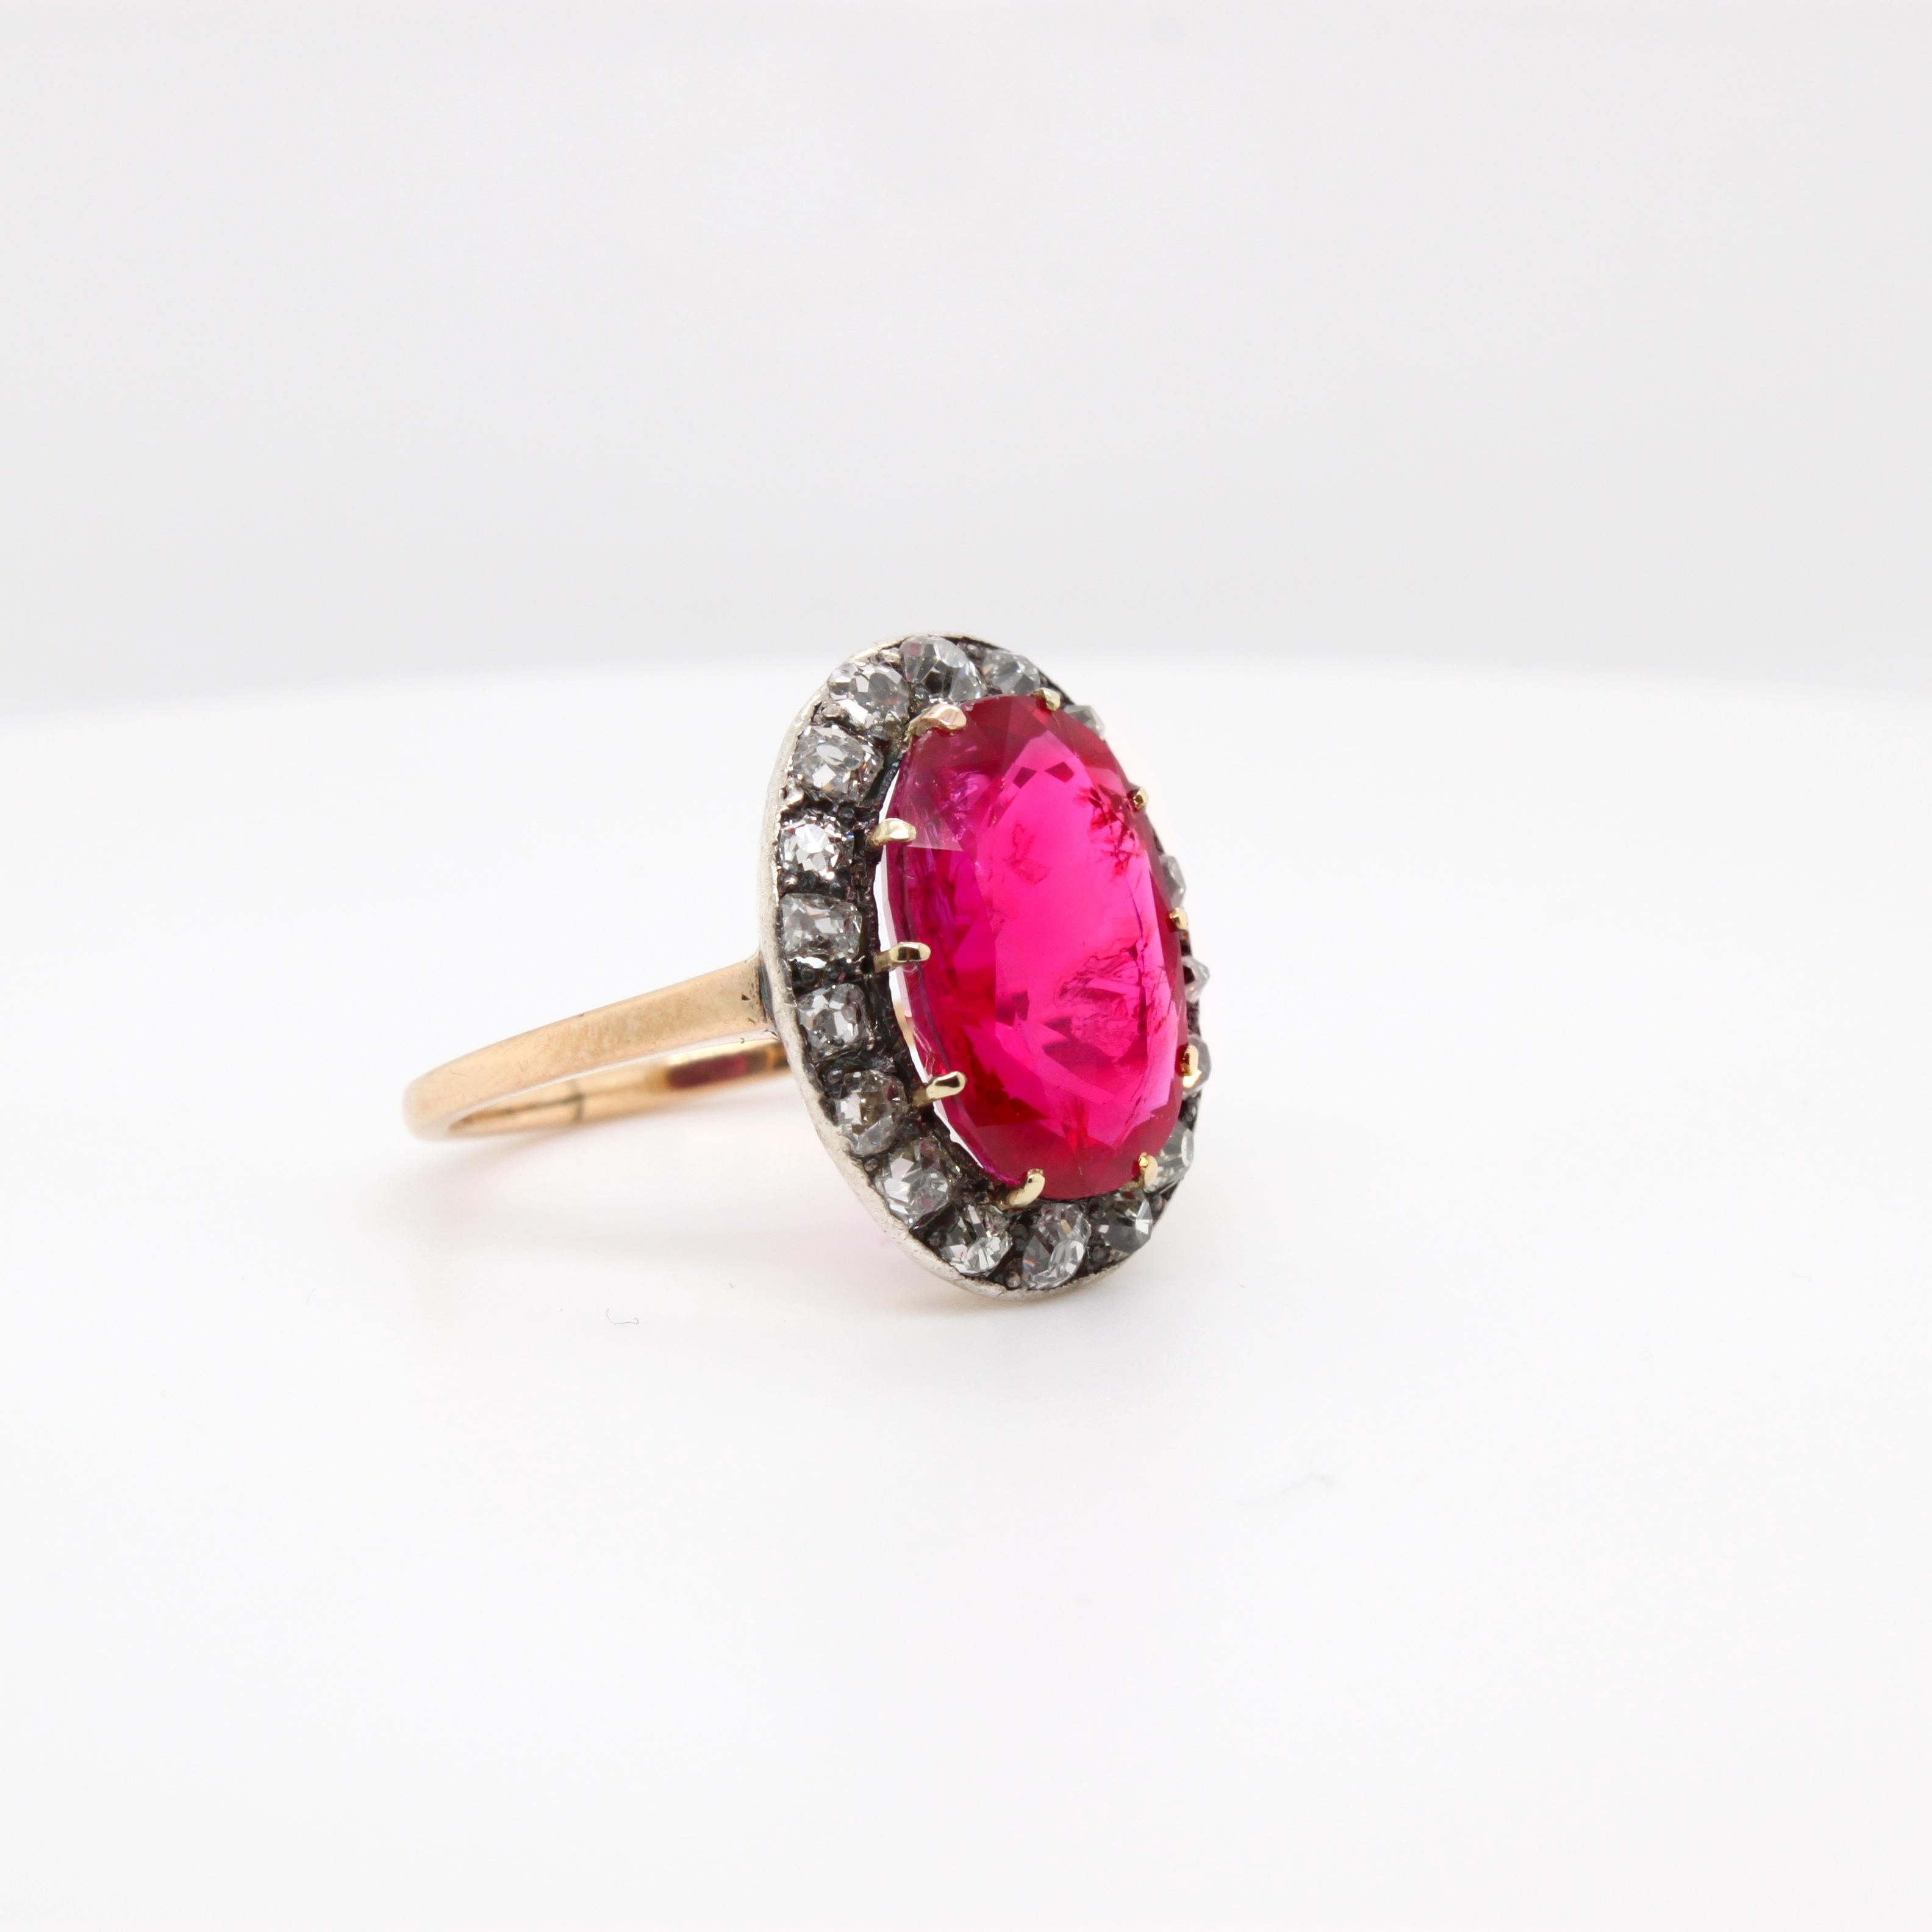 Important Victorian Natural Burmese Ruby and Diamond ring, ca. 1890s

The ring centres a spectacular natural unheated Burma Ruby of 6.38ct (SSEF certified), surrounded by a cluster of old-mine cut diamonds.
The ruby shows a beautiful intense crimson